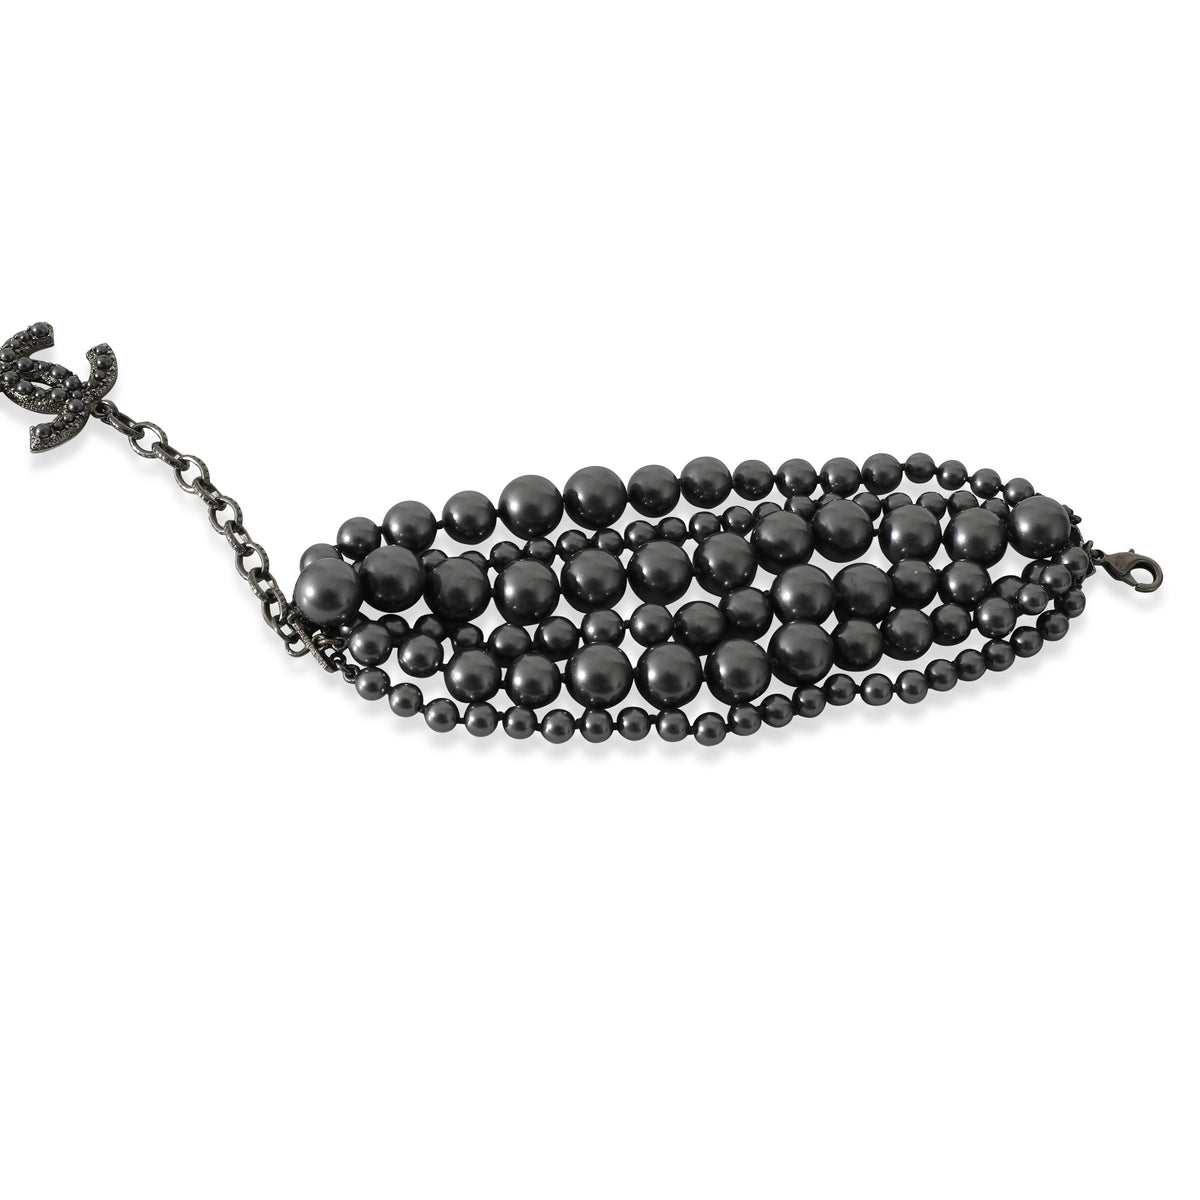 Chanel 2014 Grey Faux Pearl Multi Strand Bracelet With CC Charm in Ruthenium